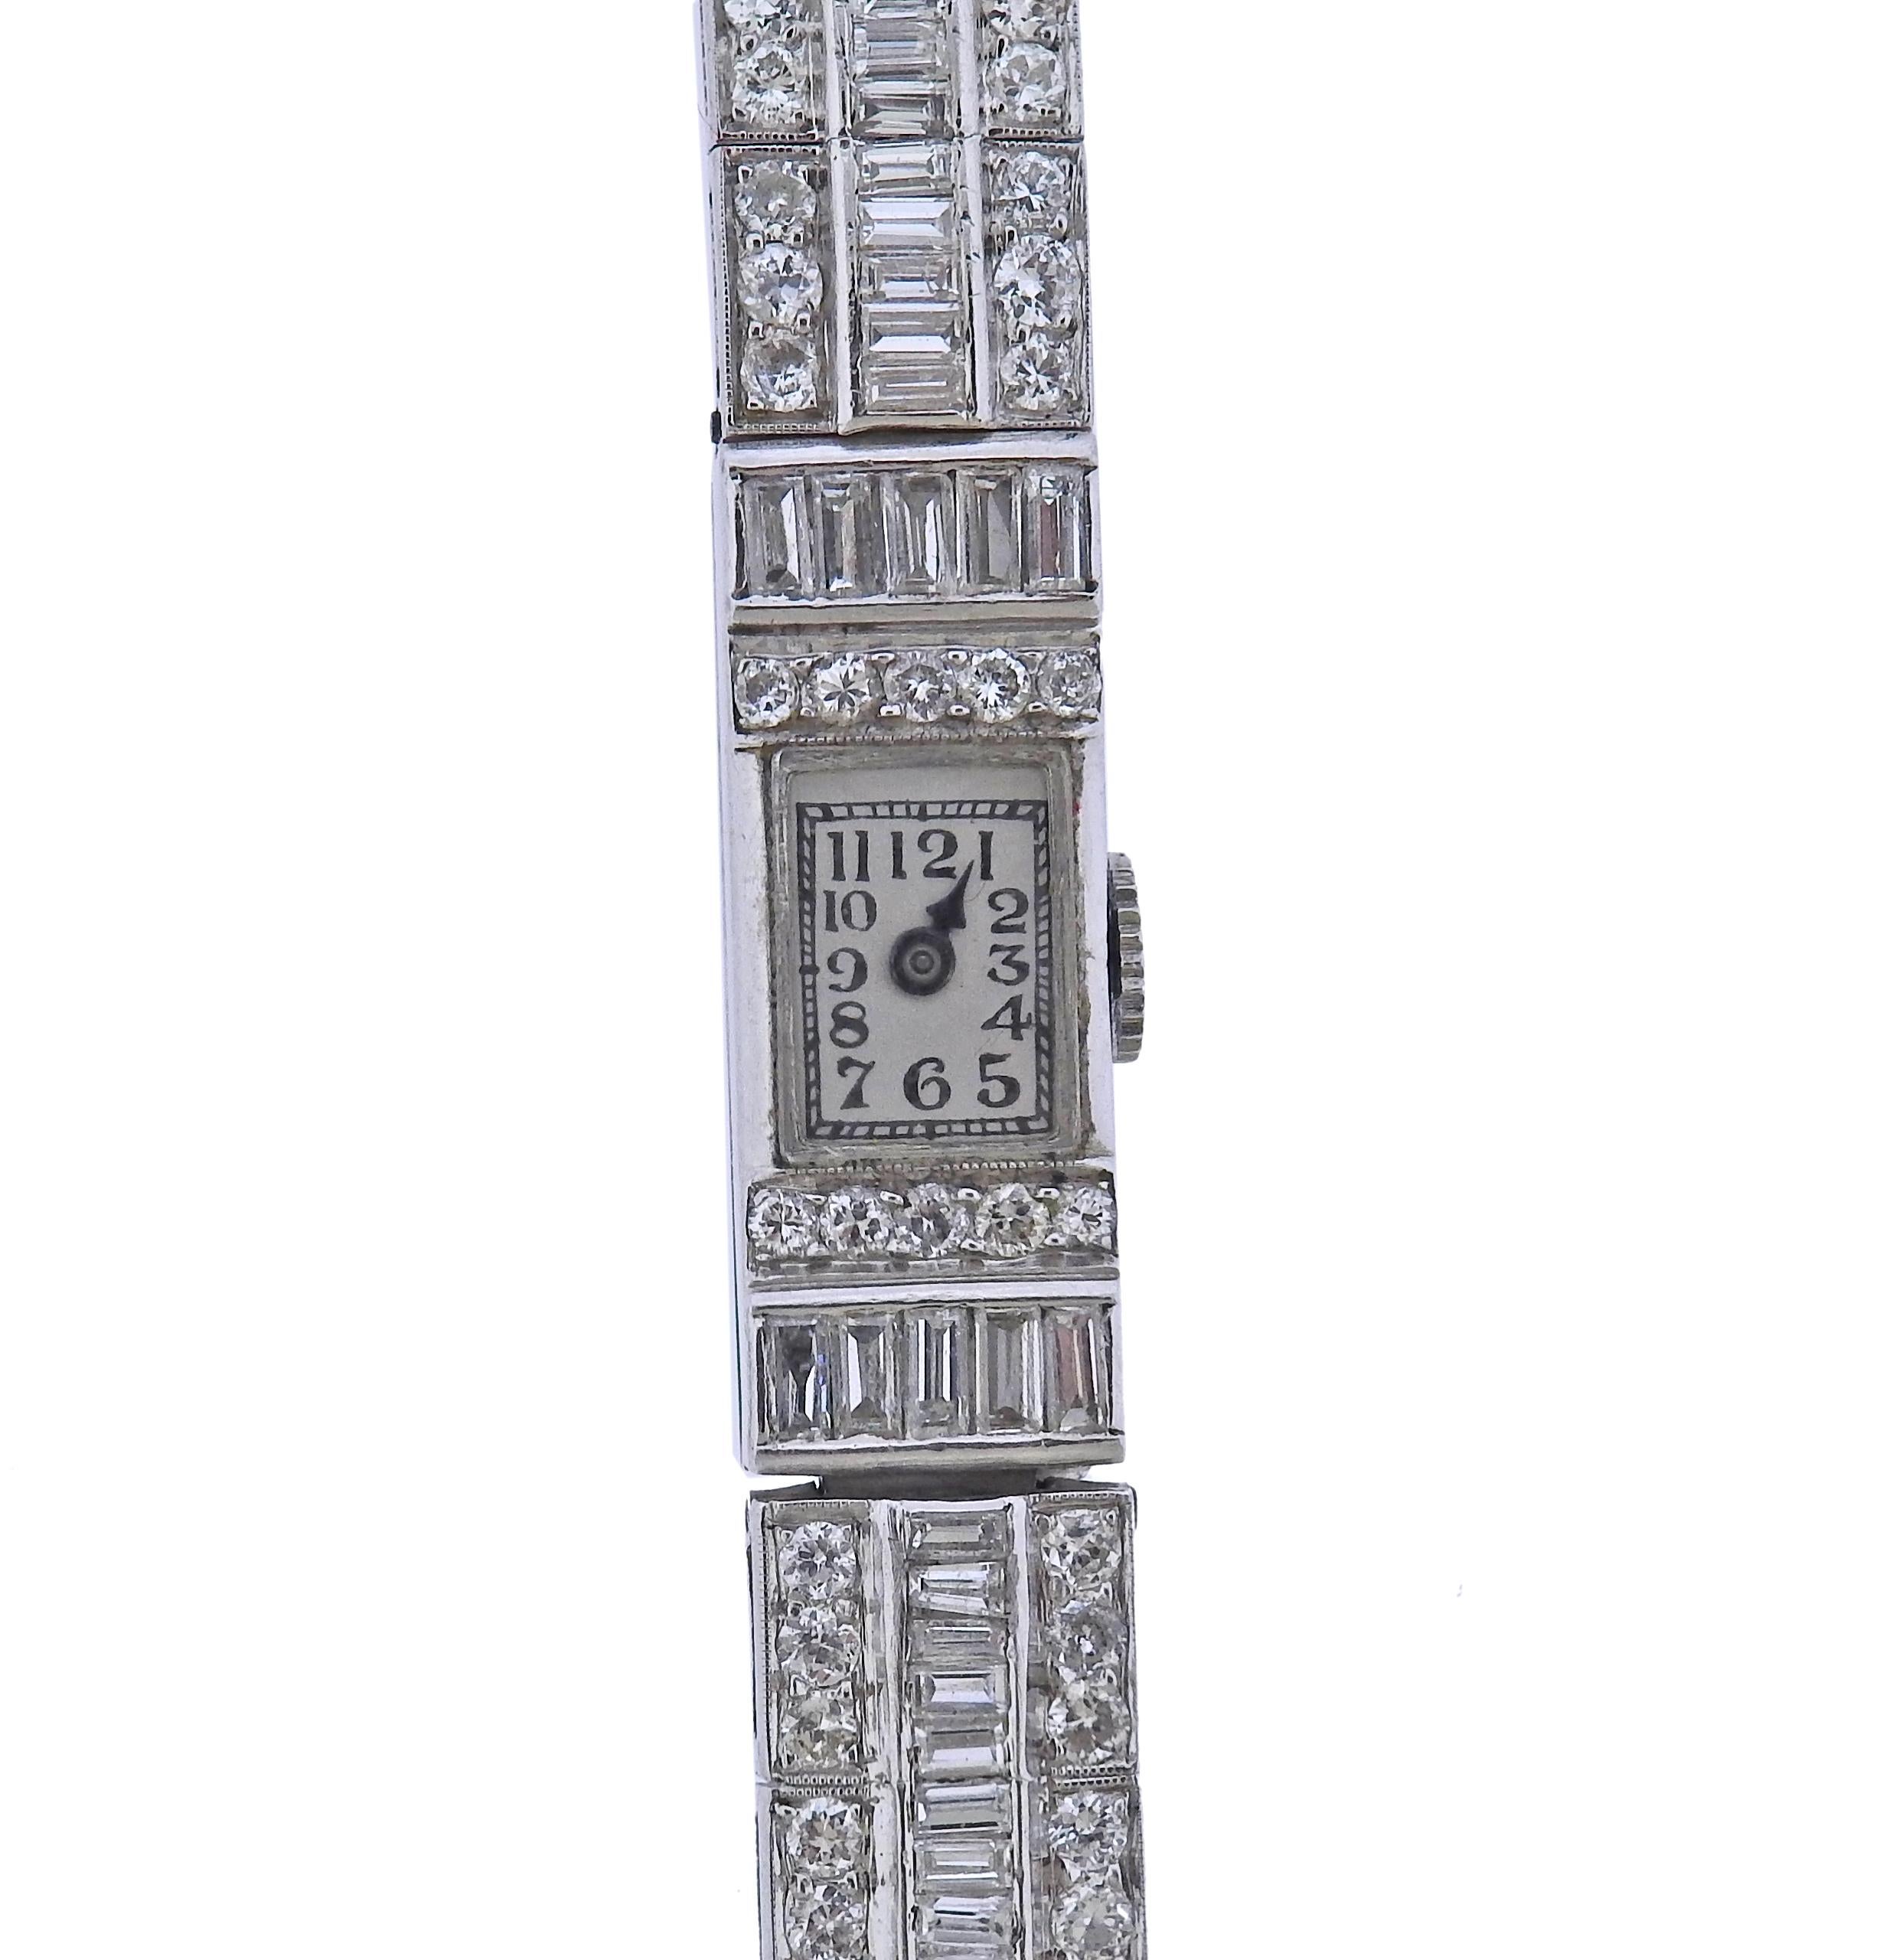 Art Deco platinum watch bracelet, with manual wind movement - working order. Bracelet decorated with approx. 3.00ctw in diamonds. Movement signed : 18 jewels, 5 pos, , Swiss, Jules Jurgensen & Co, # 17887. Bracelet is 6.5